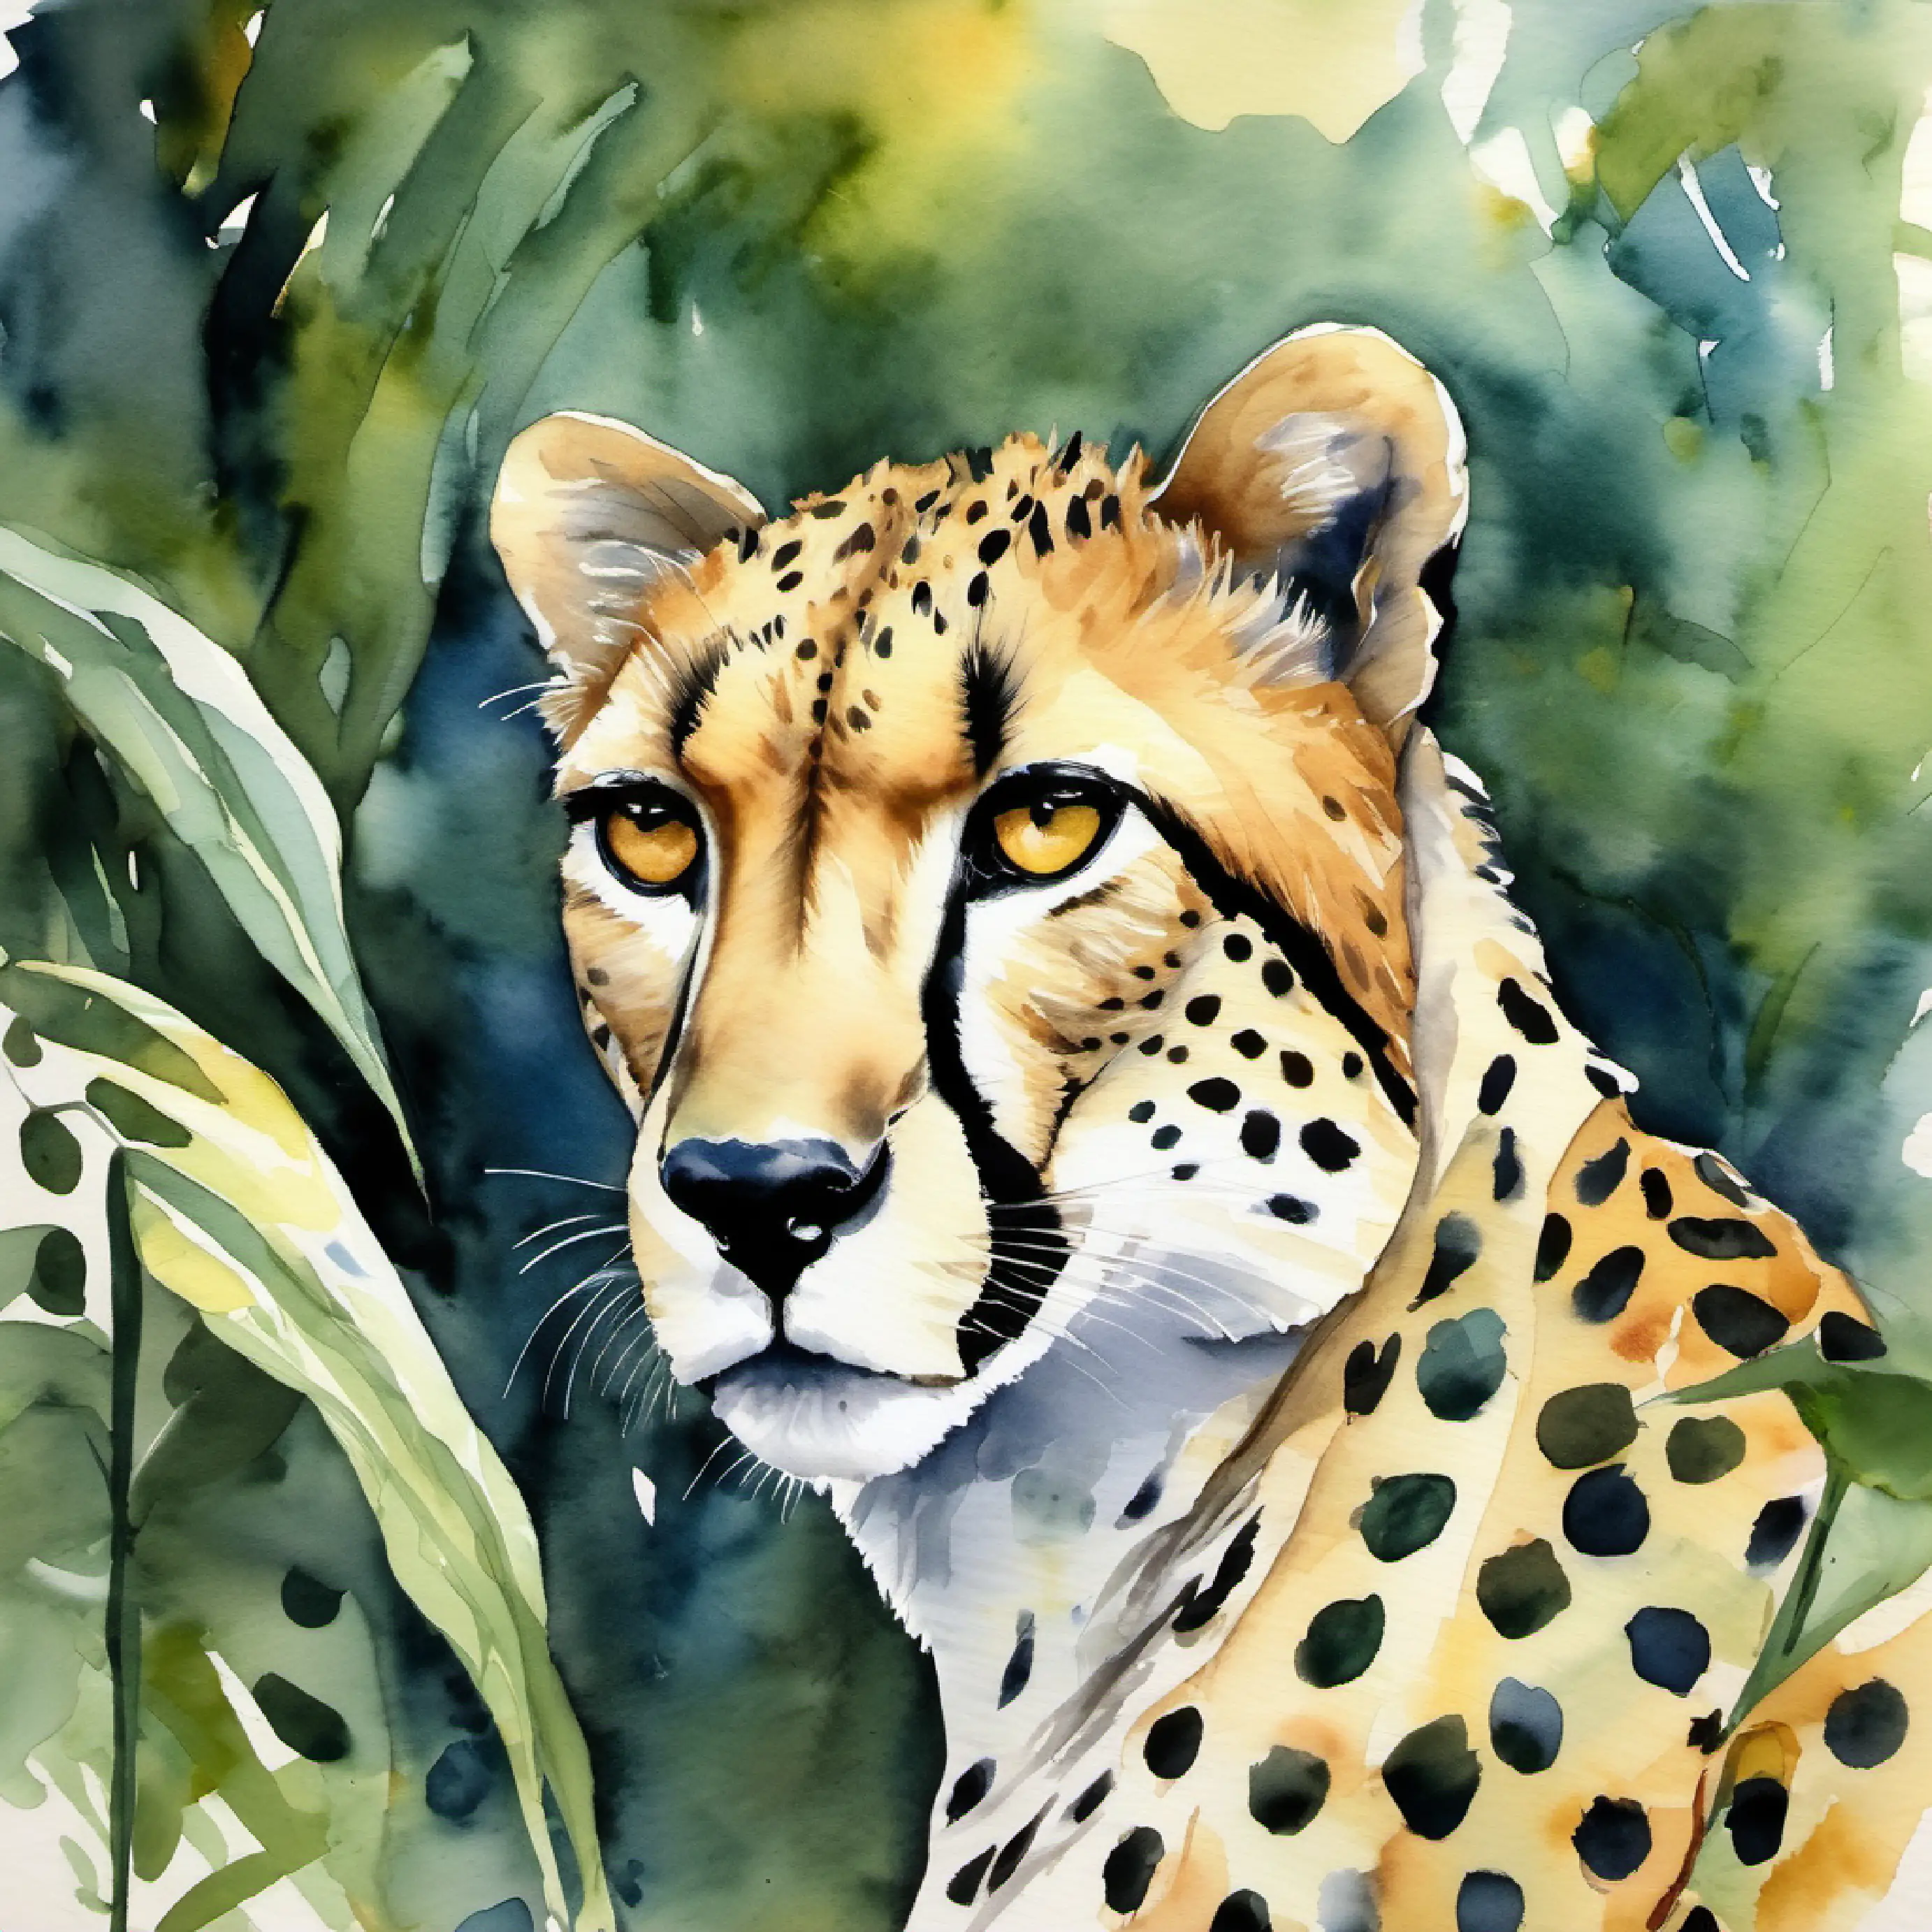 Spotted cheetah, agile, with alert golden eyes in his jungle, thinking of adventure.